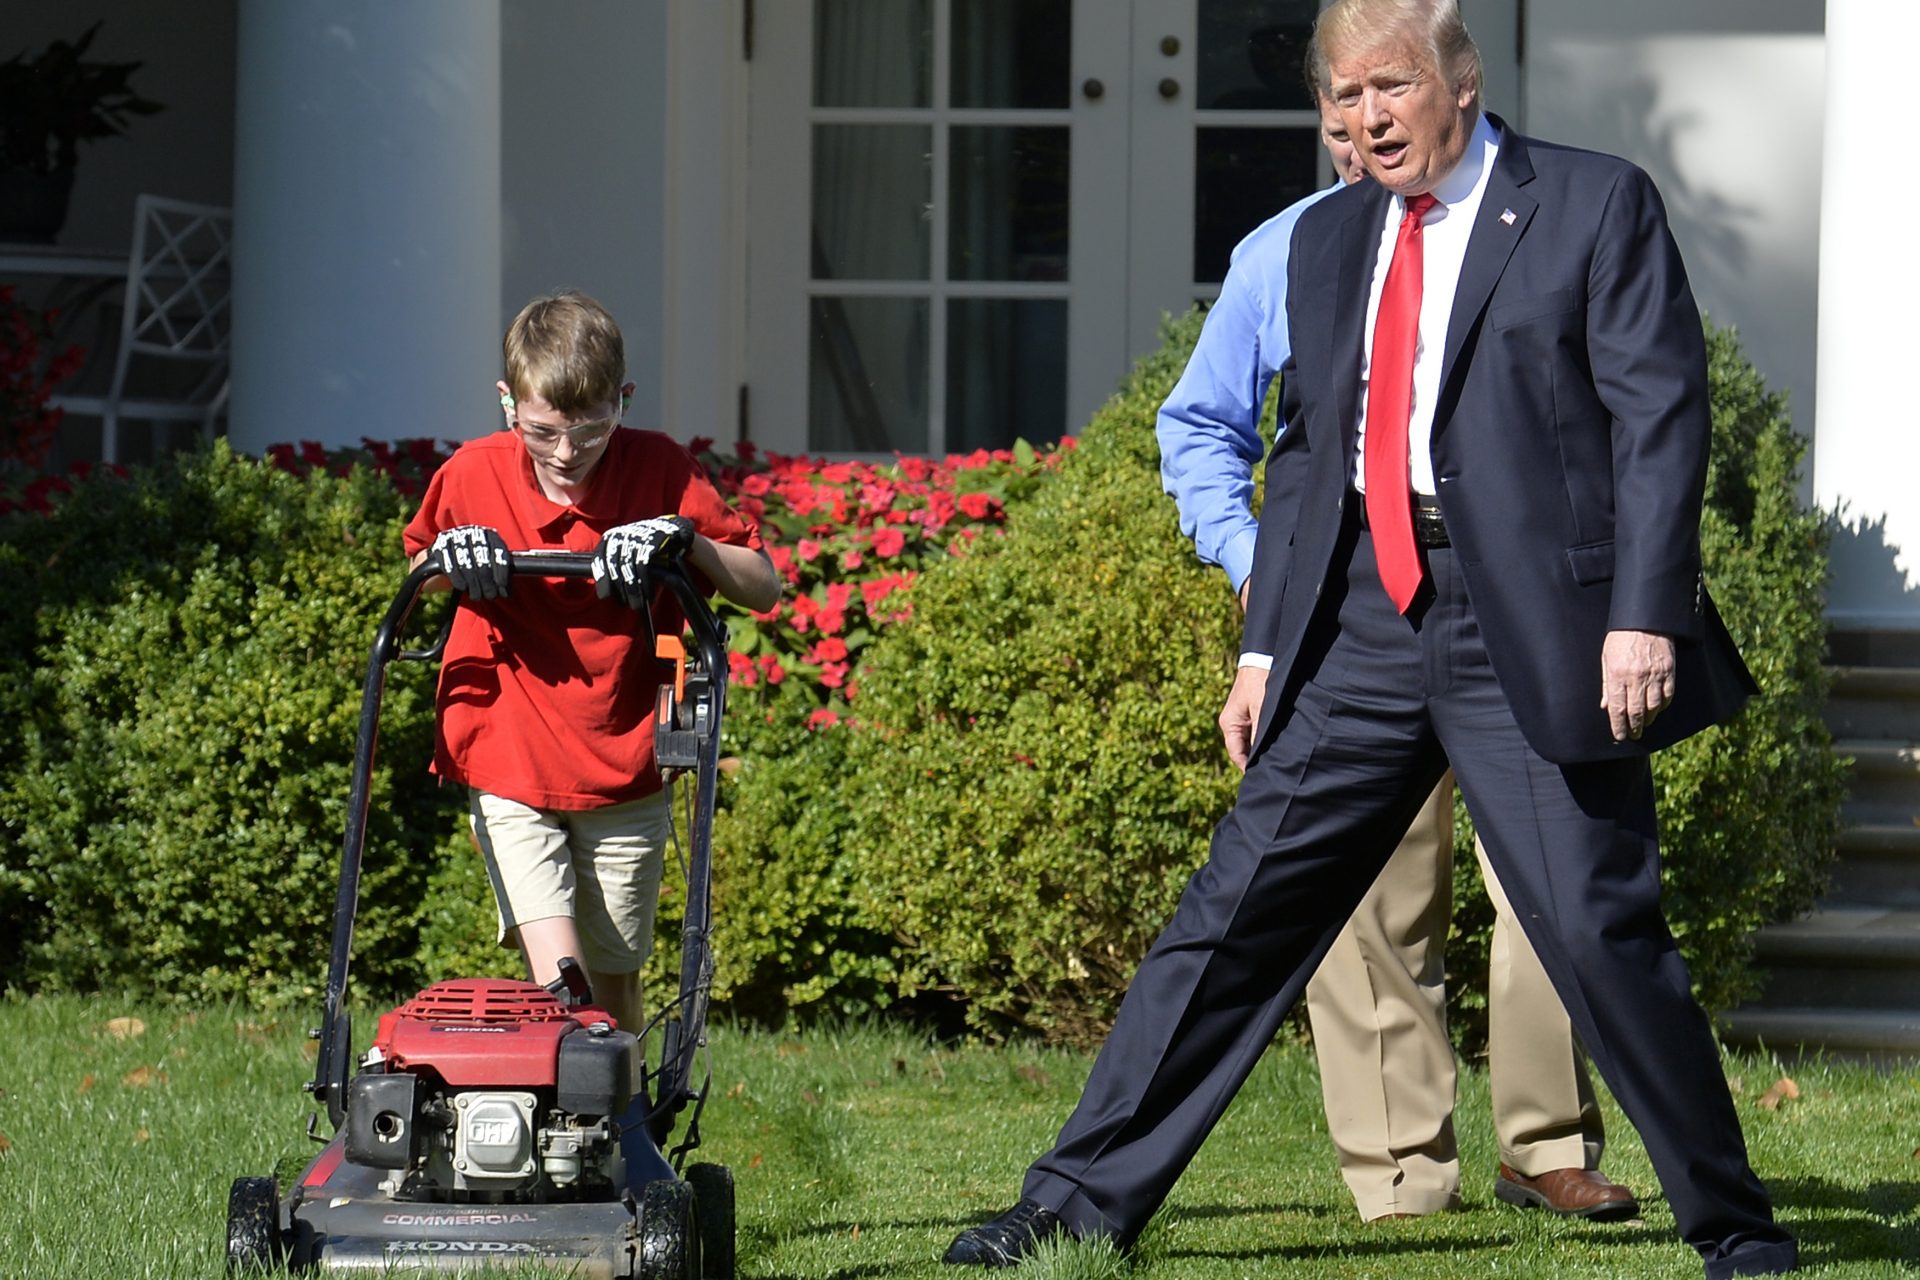 When Trump hung out with the White House lawn boy 